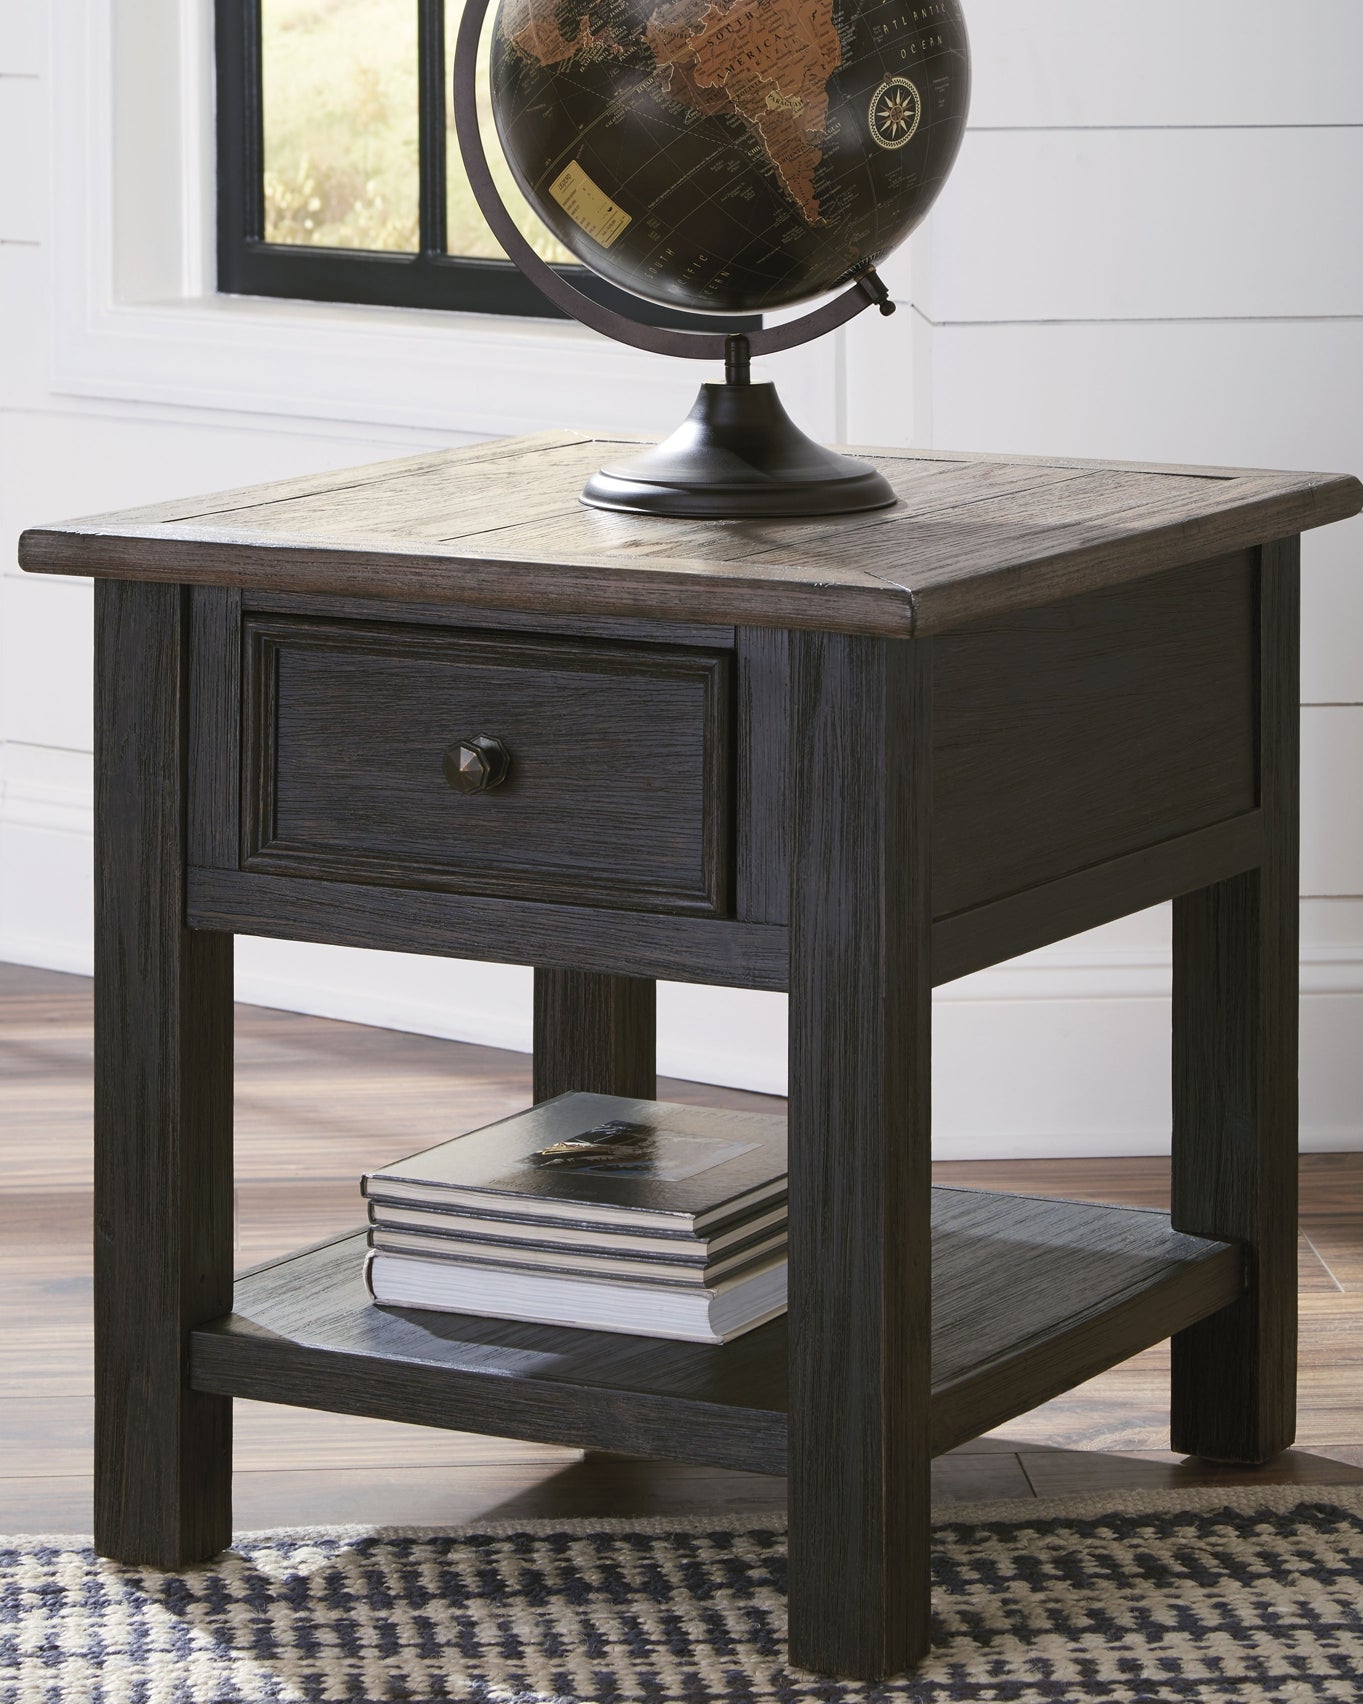 Tyler Creek Coffee Table with 1 End Table Wilson Furniture (OH)  in Bridgeport, Ohio. Serving Moundsville, Richmond, Smithfield, Cadiz, & St. Clairesville